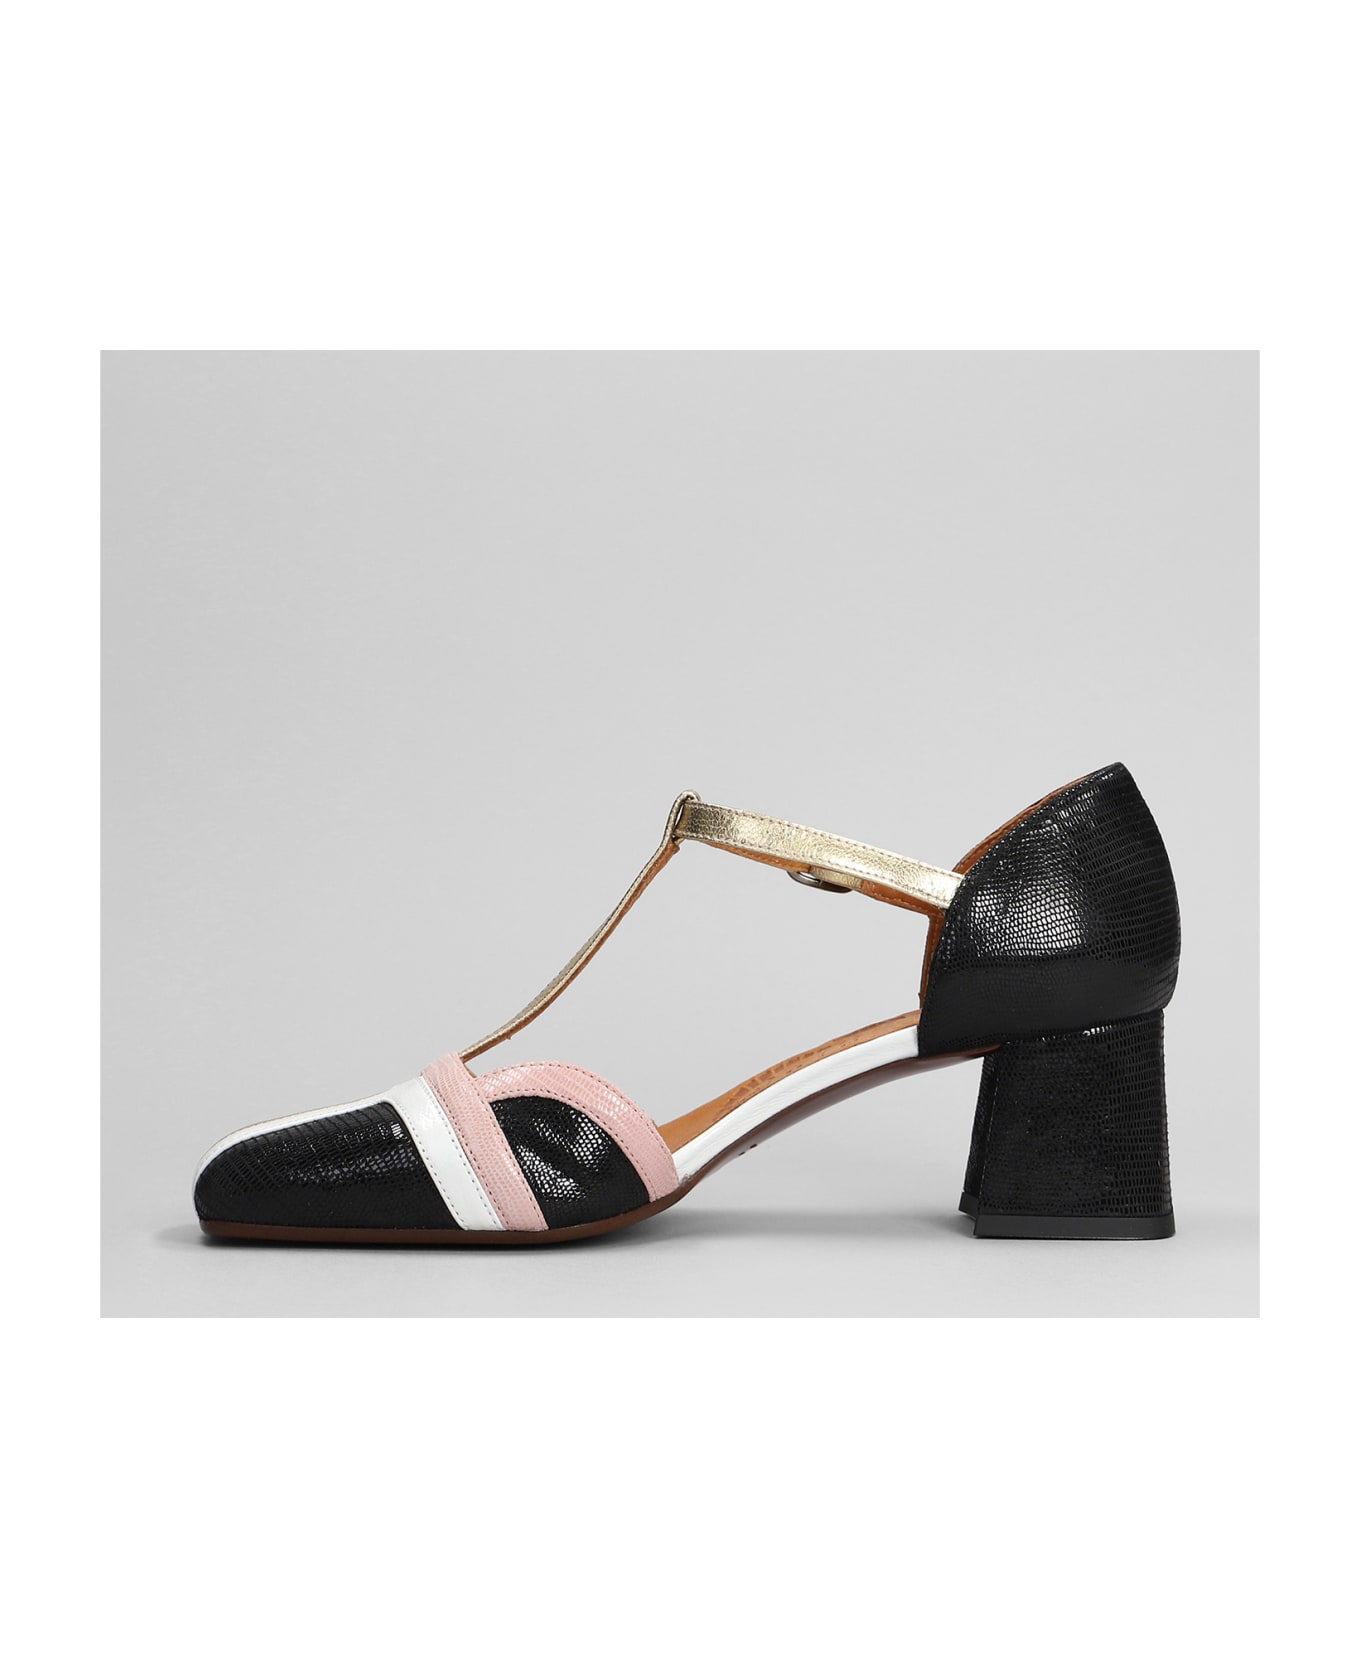 Chie Mihara Volai 44 Pumps In Black Leather - black ハイヒール